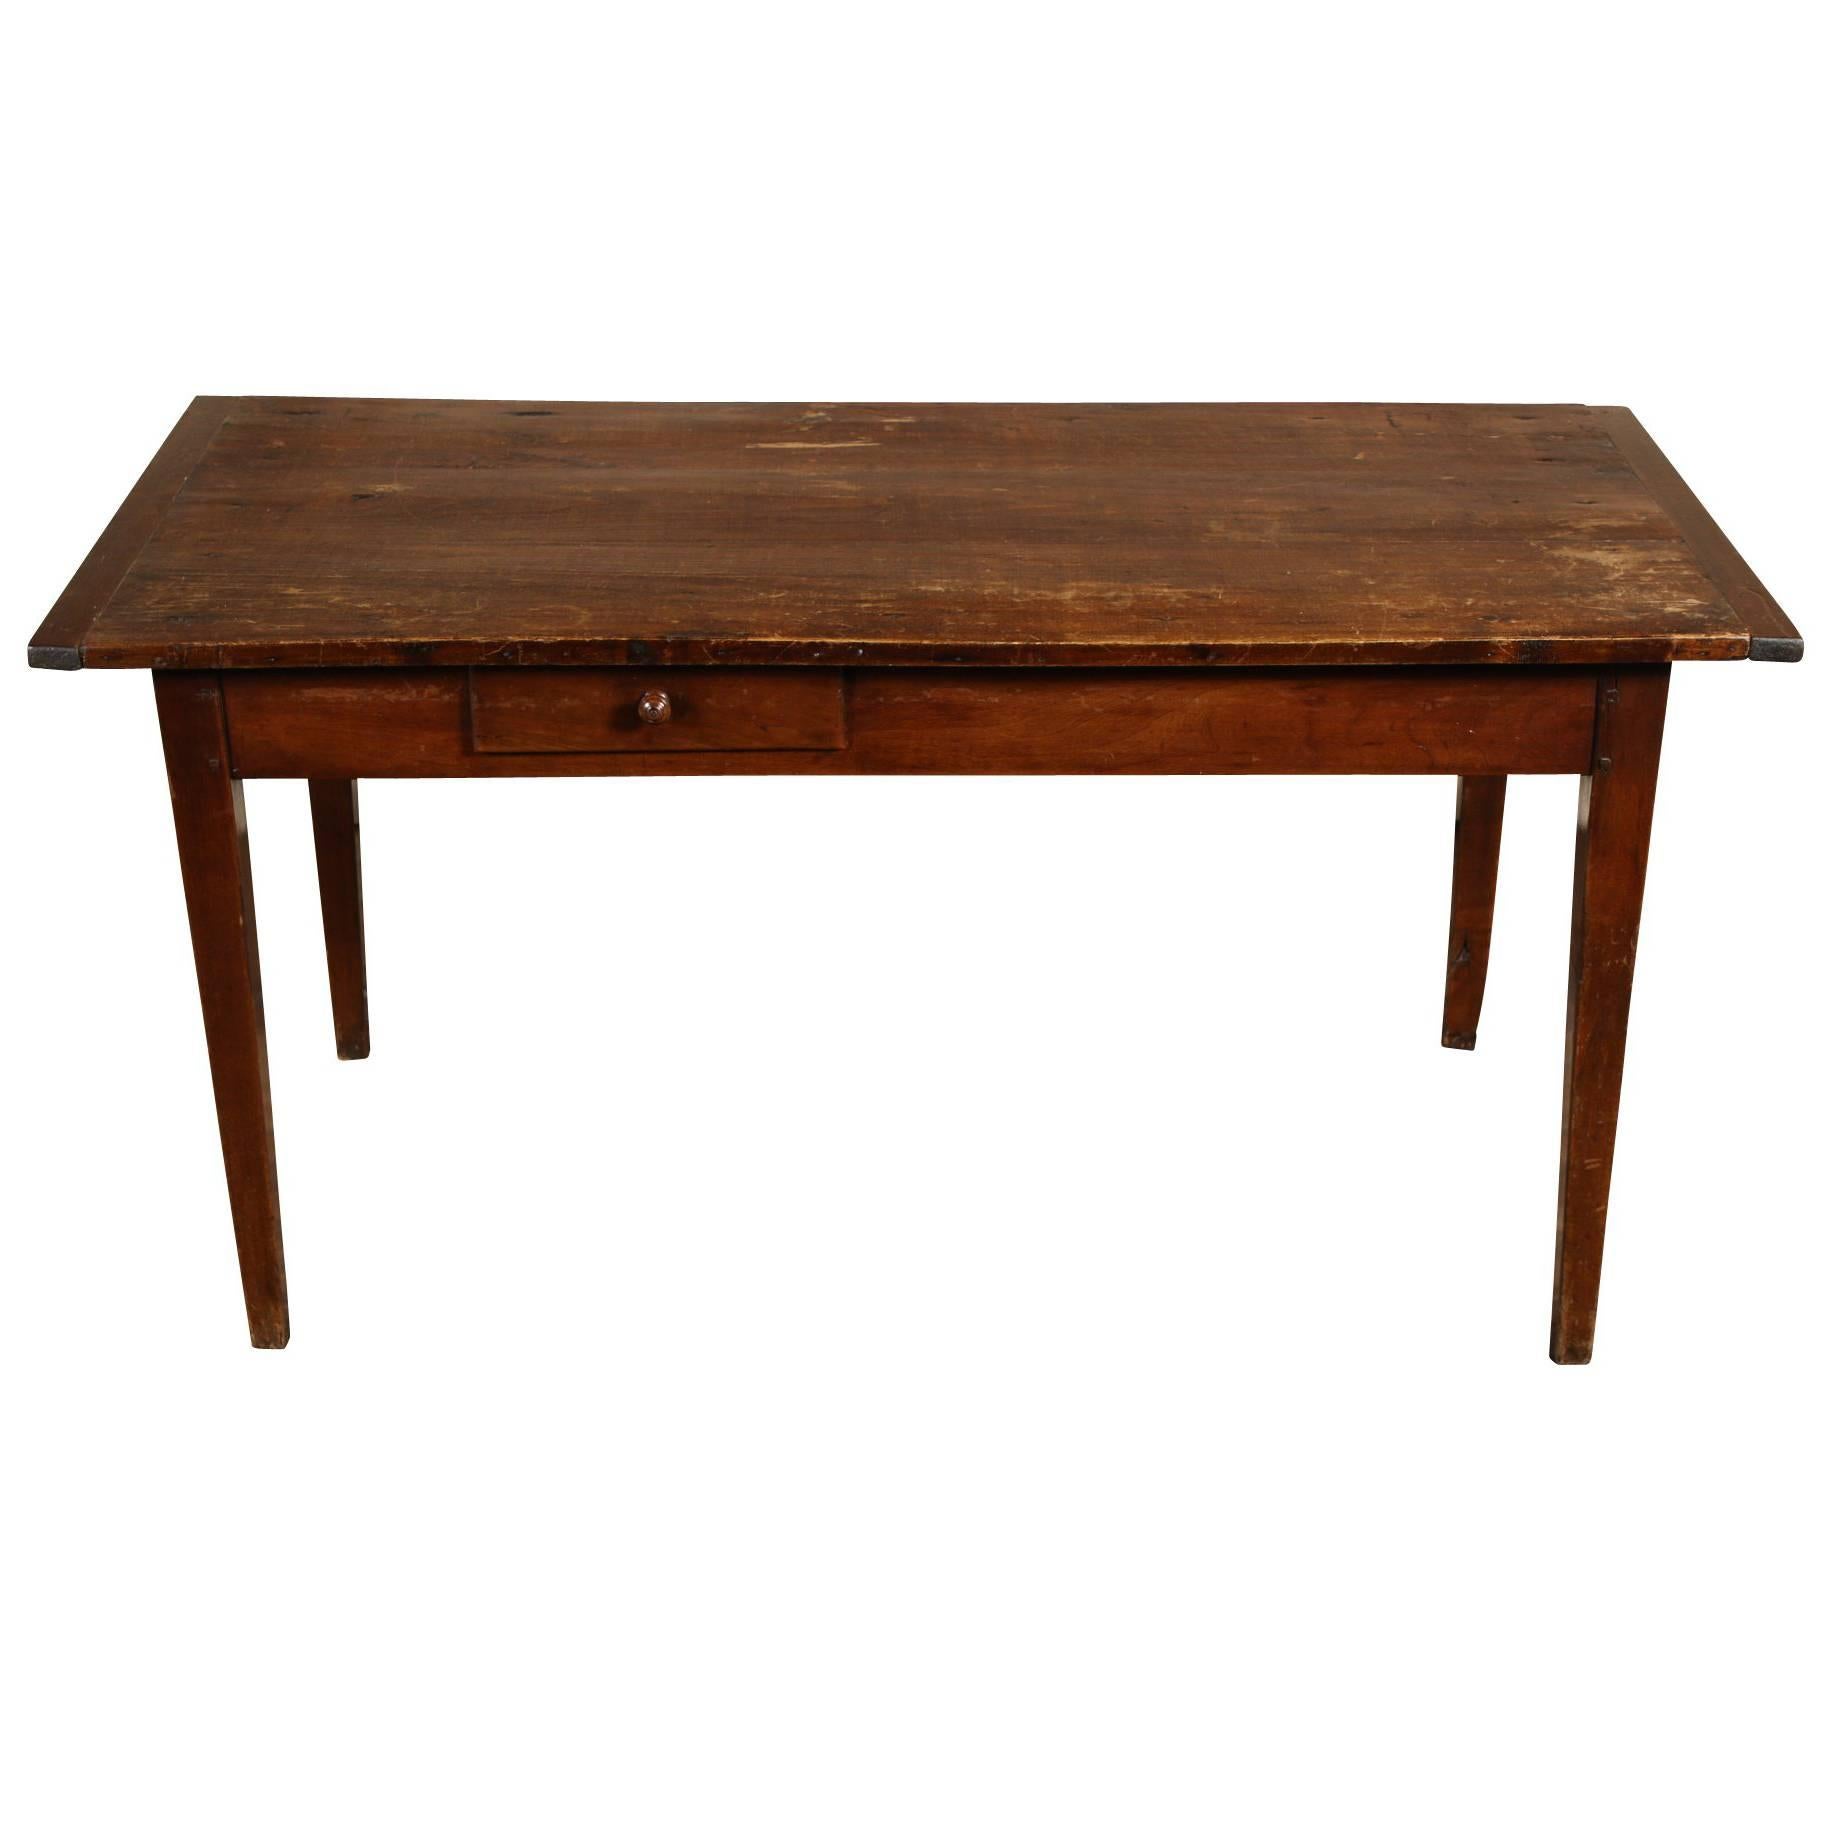 Antique Walnut Farm House Plank Top Country Table